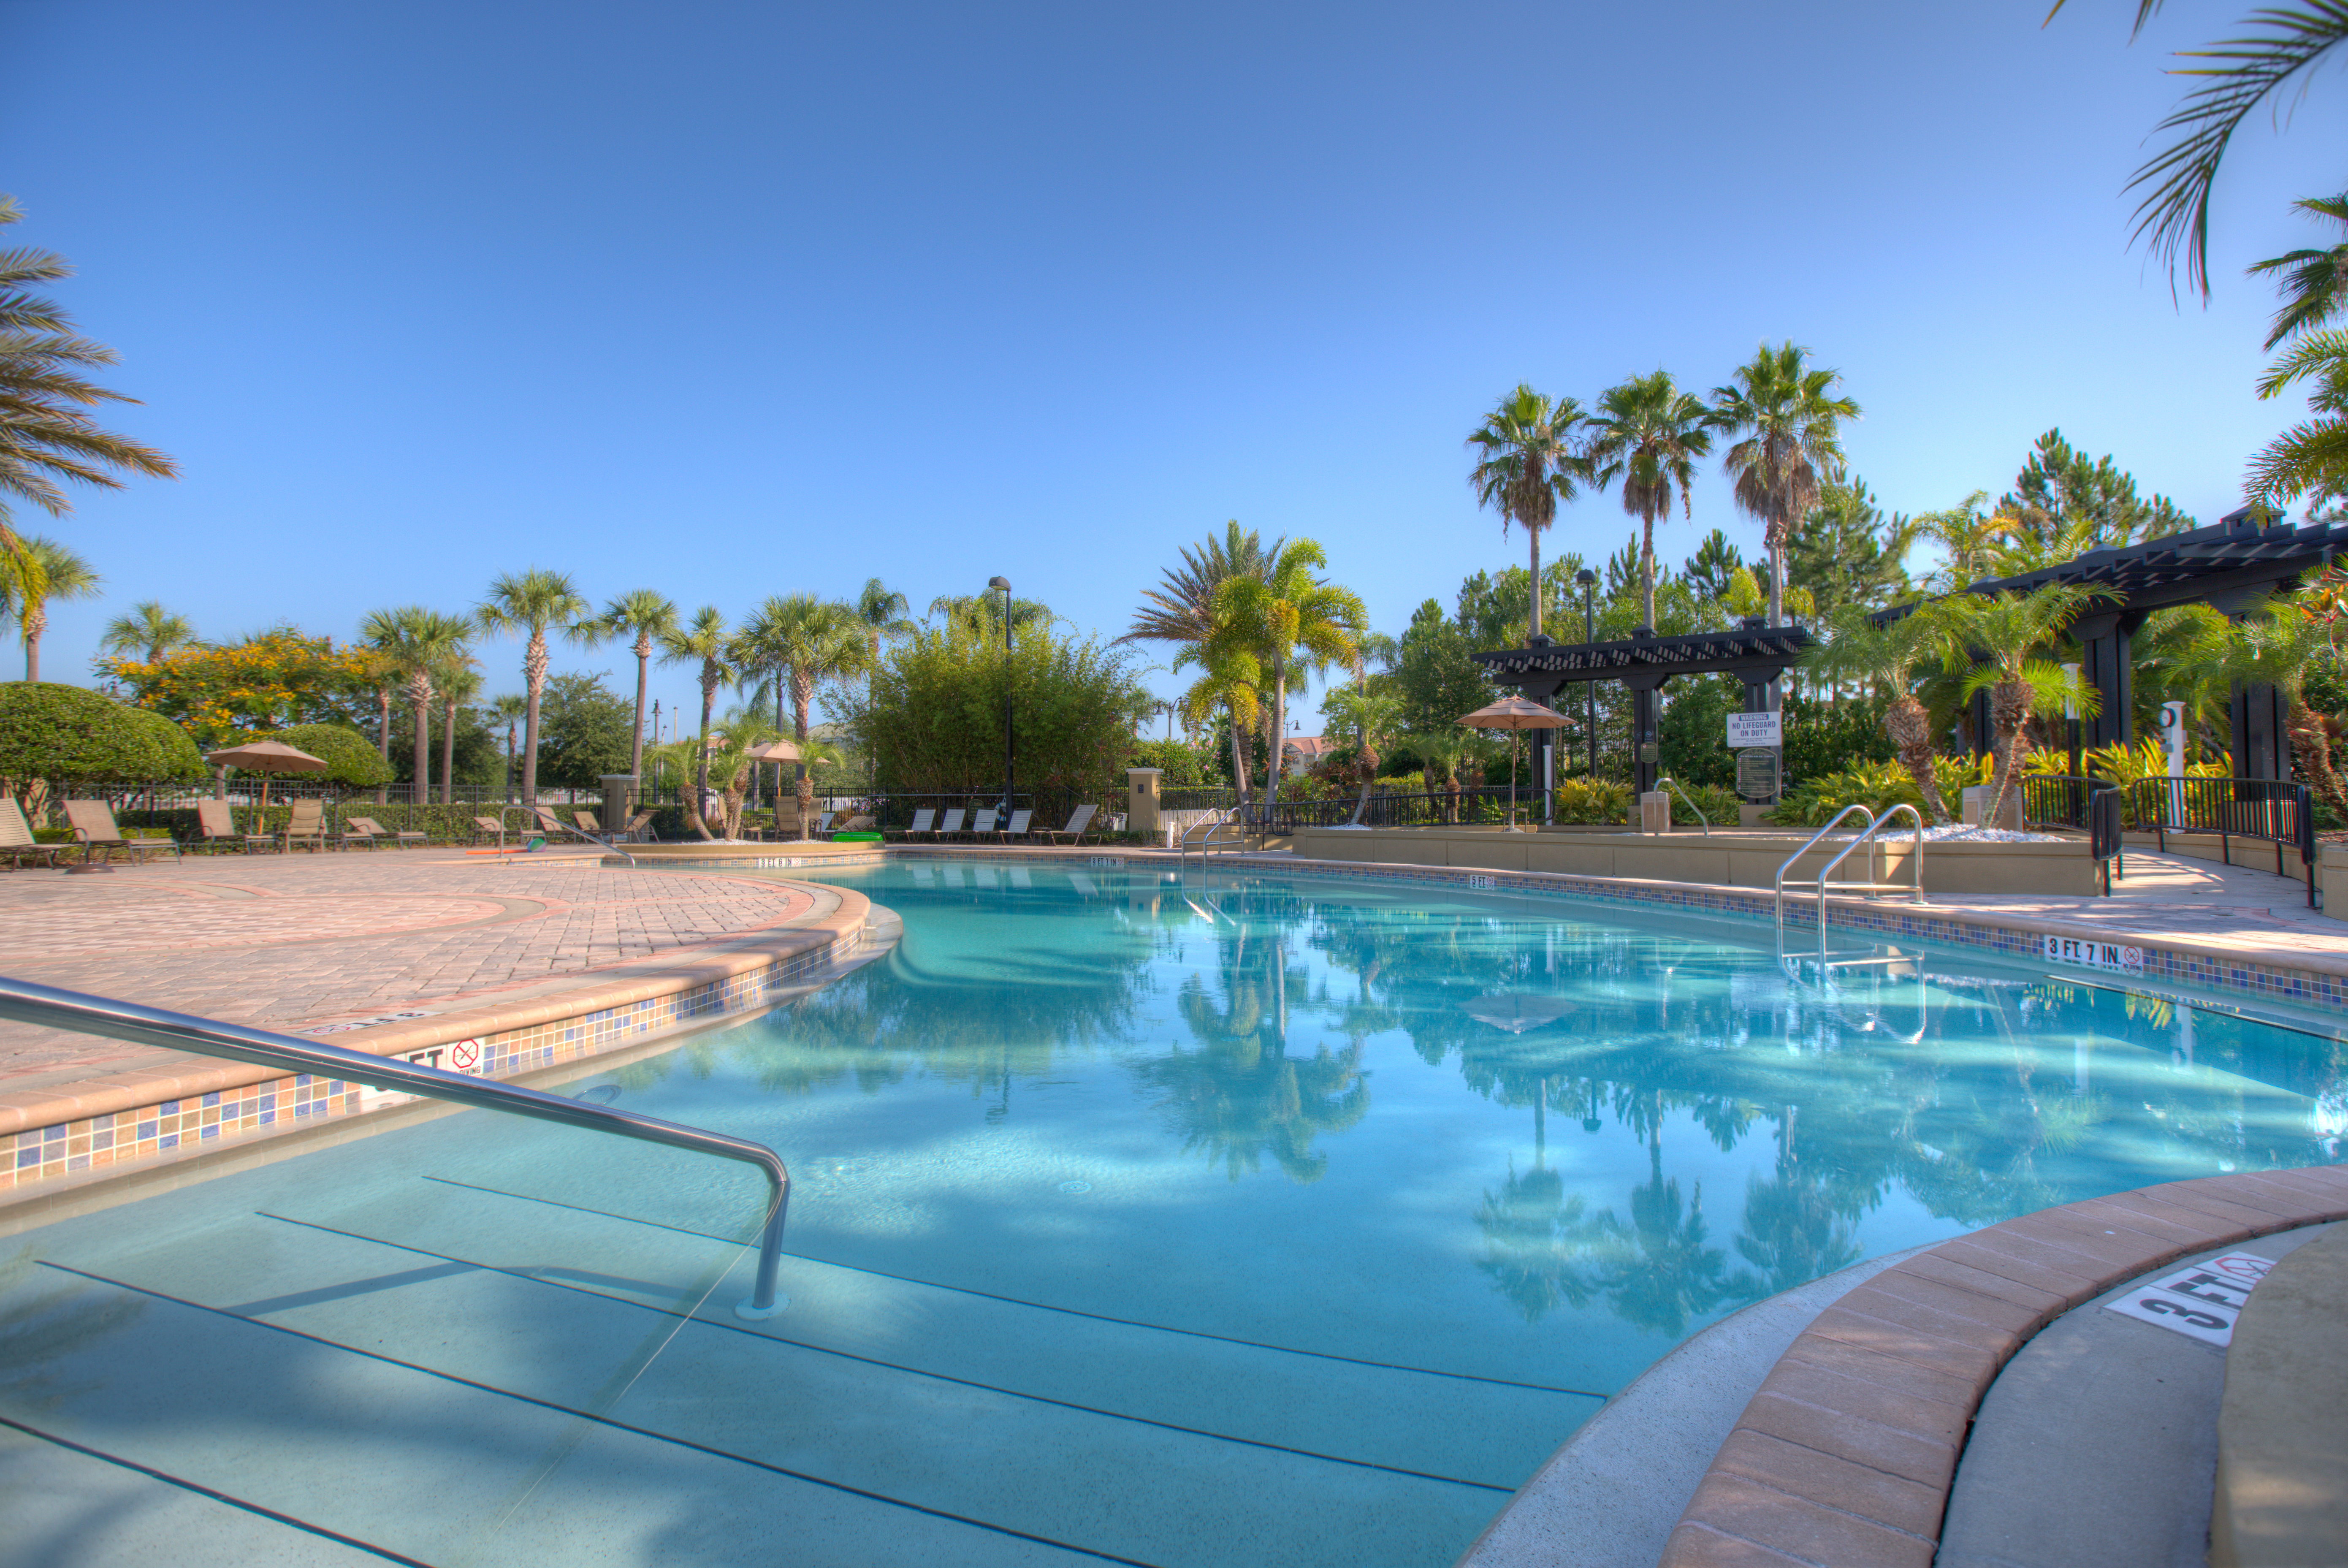 Discover serenity at the Vista Cay Resort Isles Pool: A tranquil oasis nestled amidst picturesque landscapes, inviting guests to unwind and soak up the Florida sun in peaceful seclusion.